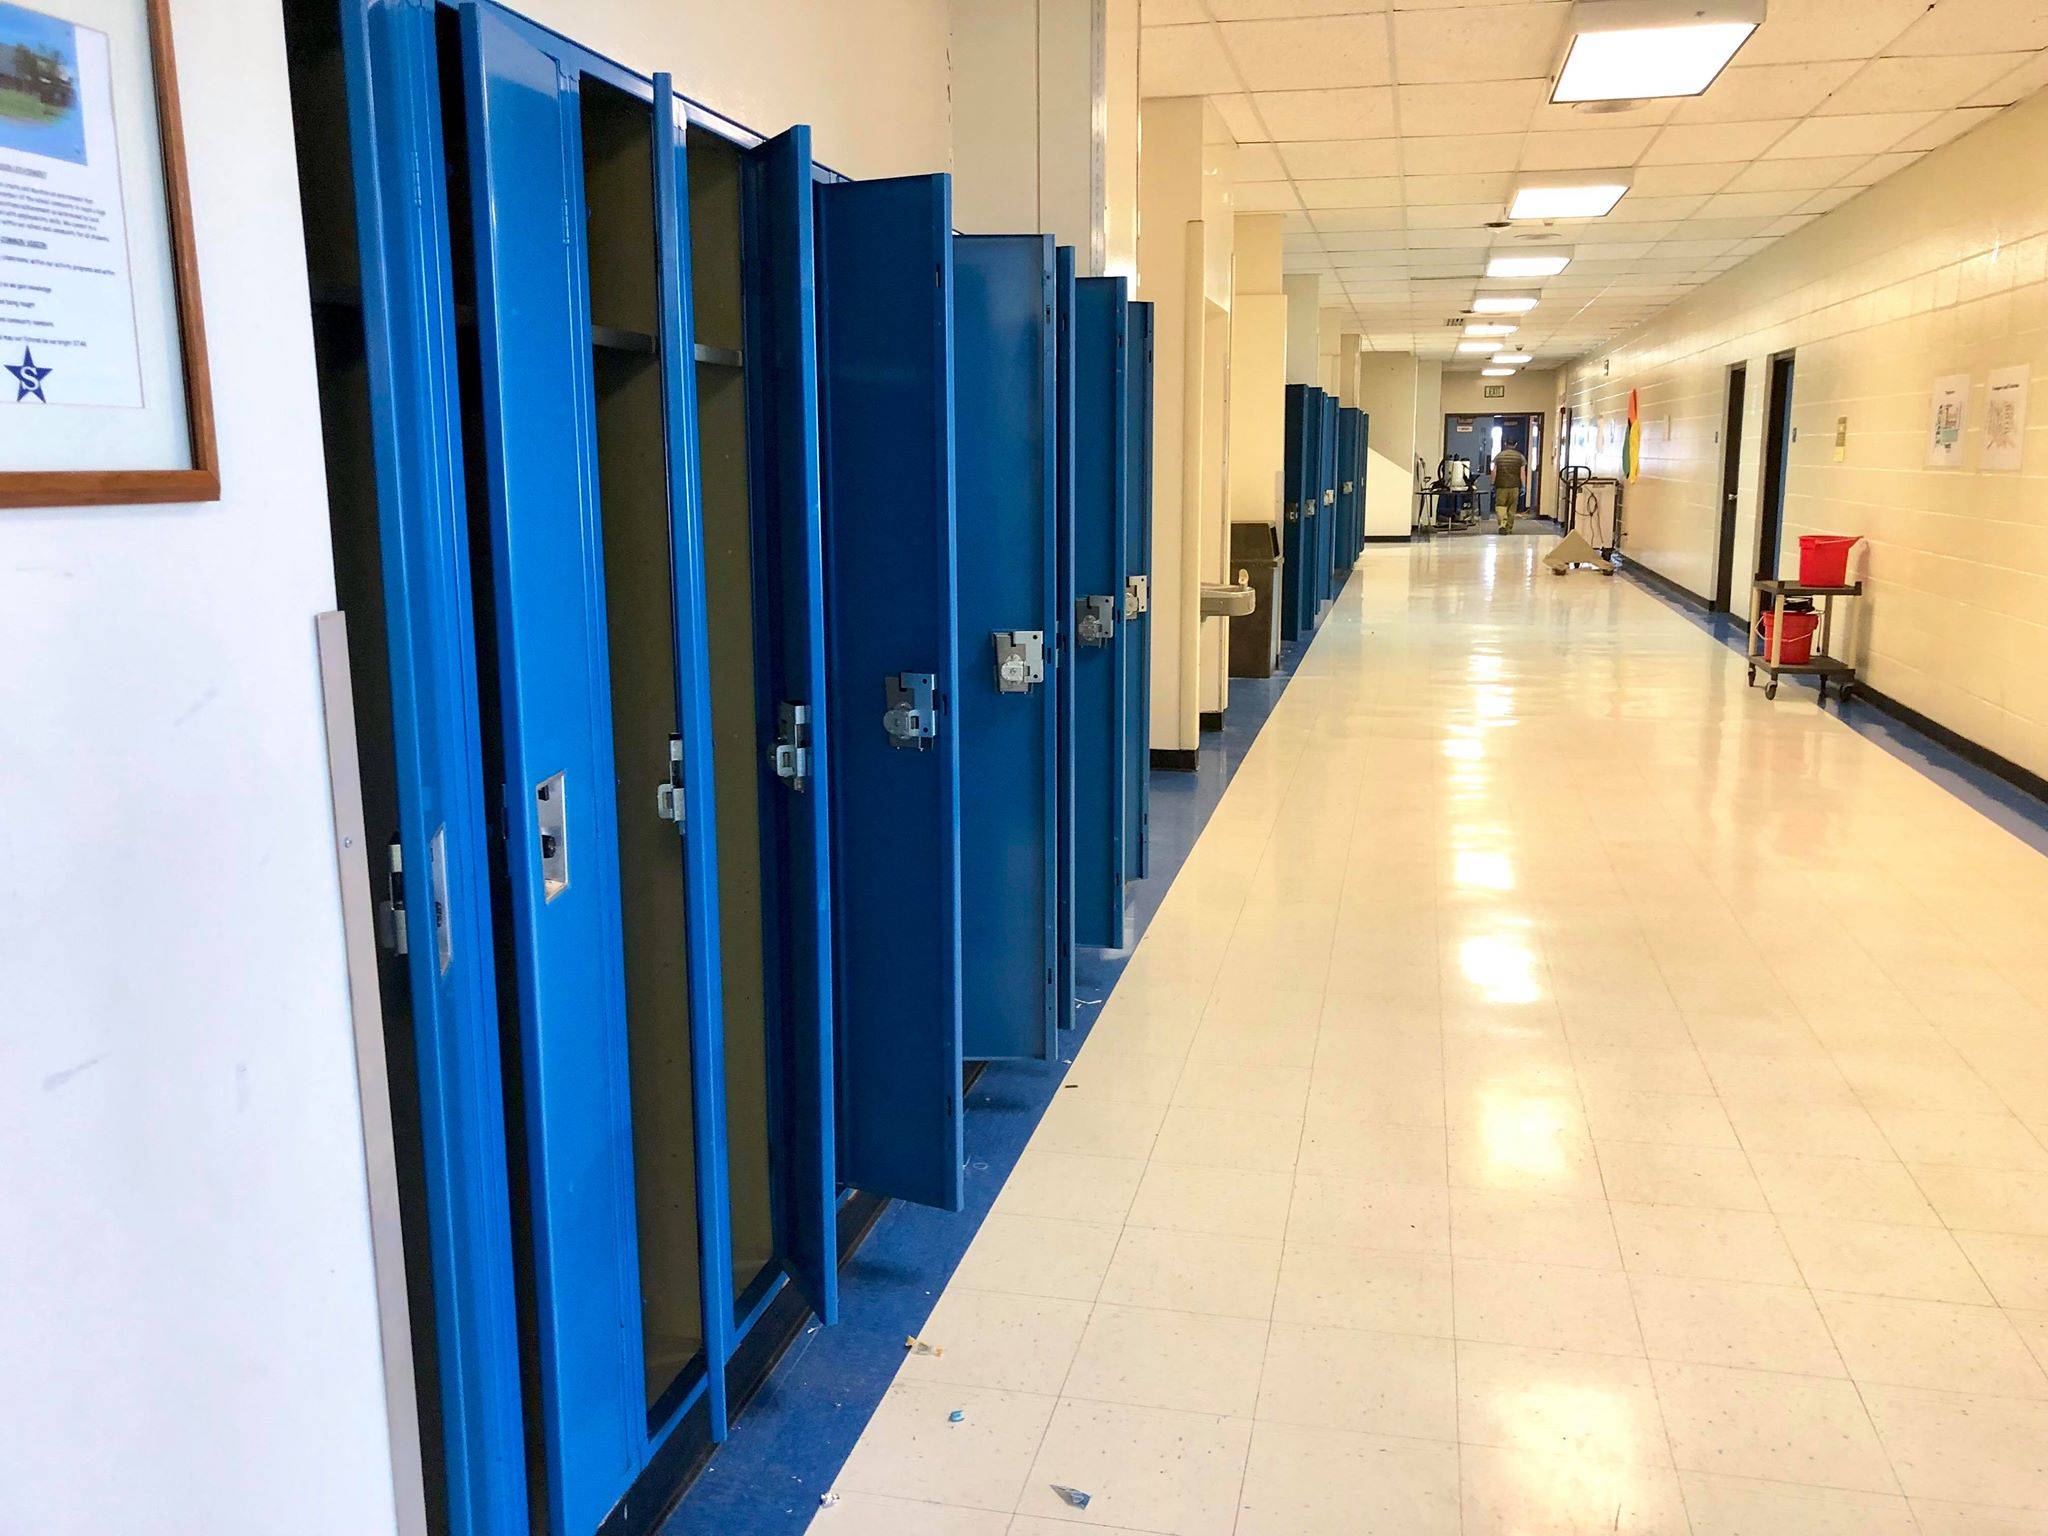 Lockers and hallways stand empty at Soldotna High School on Monday, April 6, 2020. Schools across Alaska are closed to slow the spread of COVID-19, the disease caused by the new coronavirus that has prompted a global pandemic. (Photo by Victoria Petersen/Peninsula Clarion)